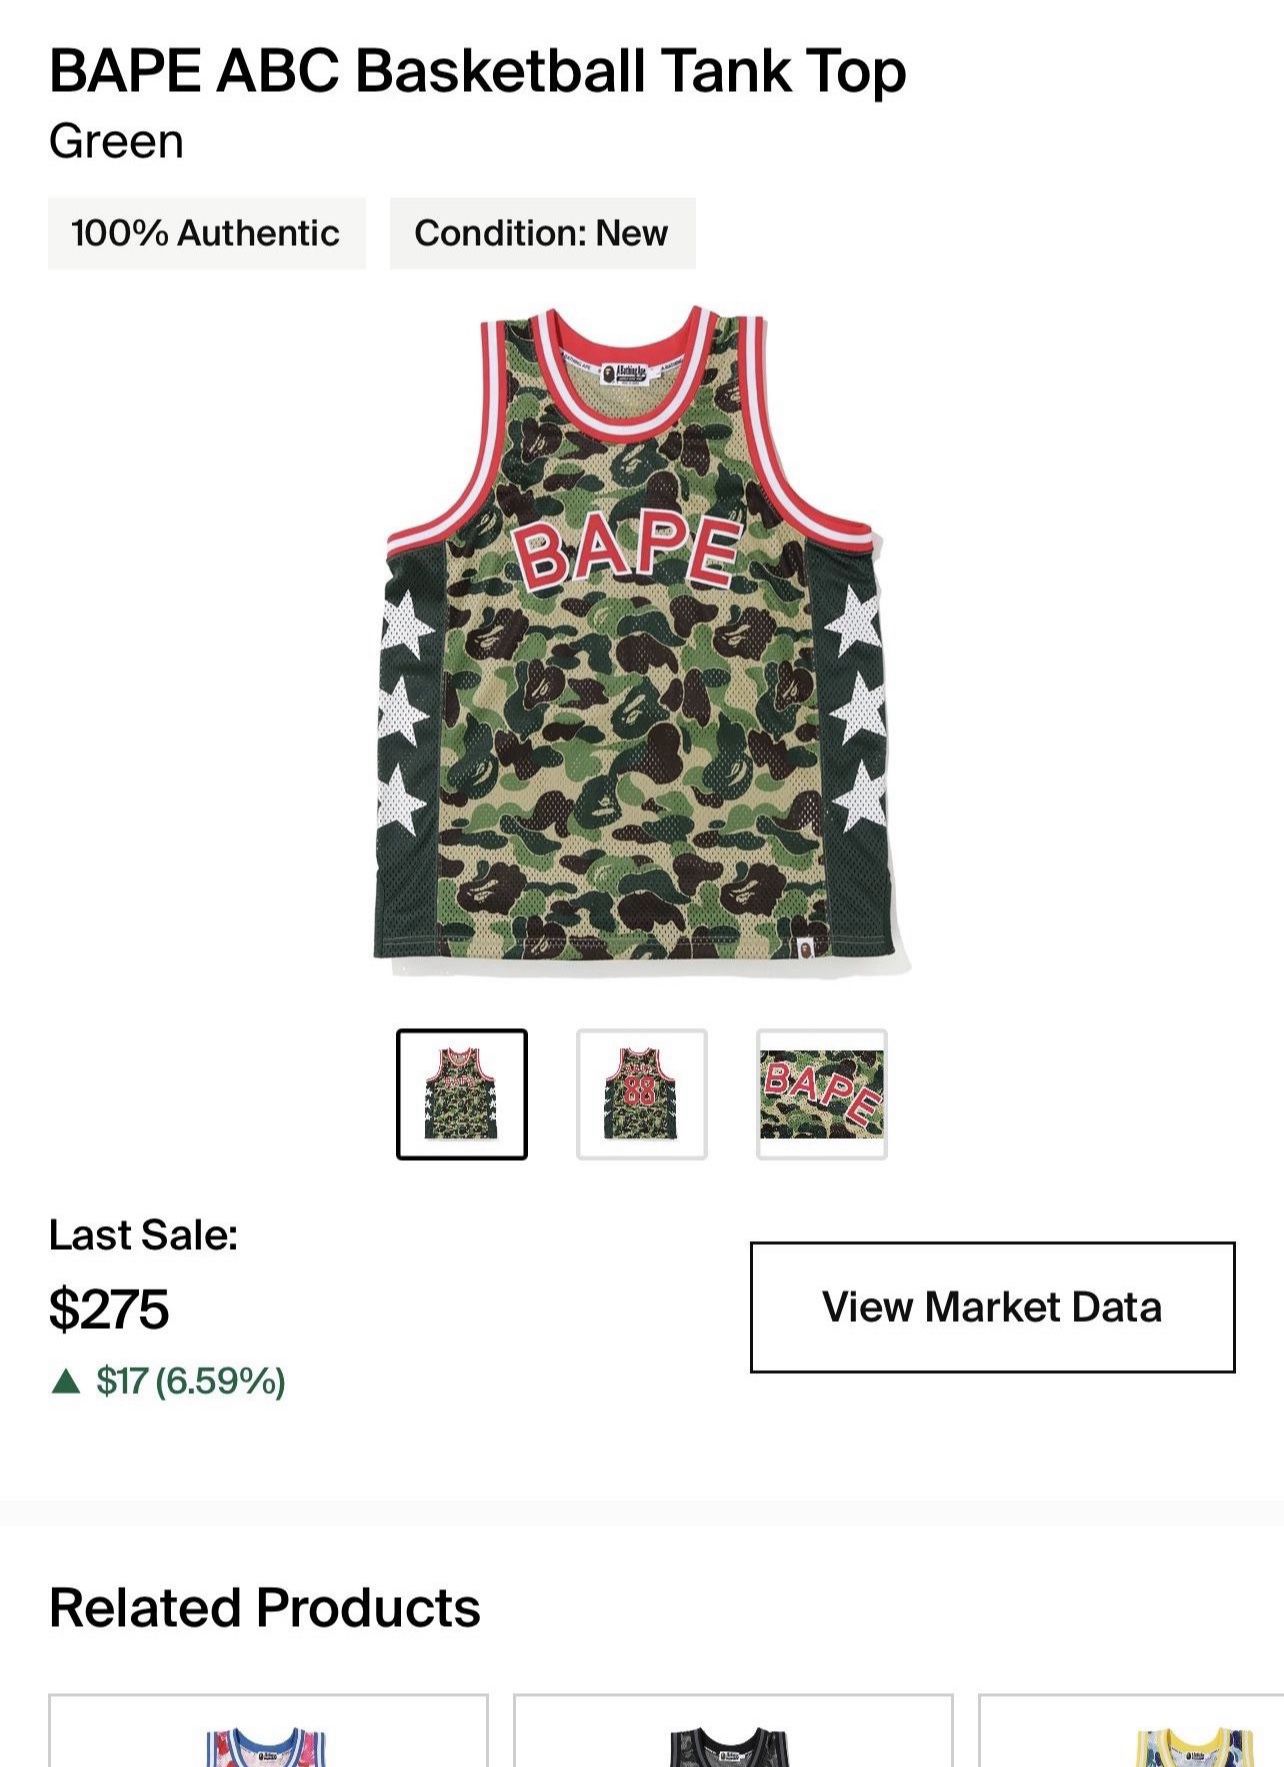 Bape basketball jersey and shorts for Sale in El Cajon, CA - OfferUp